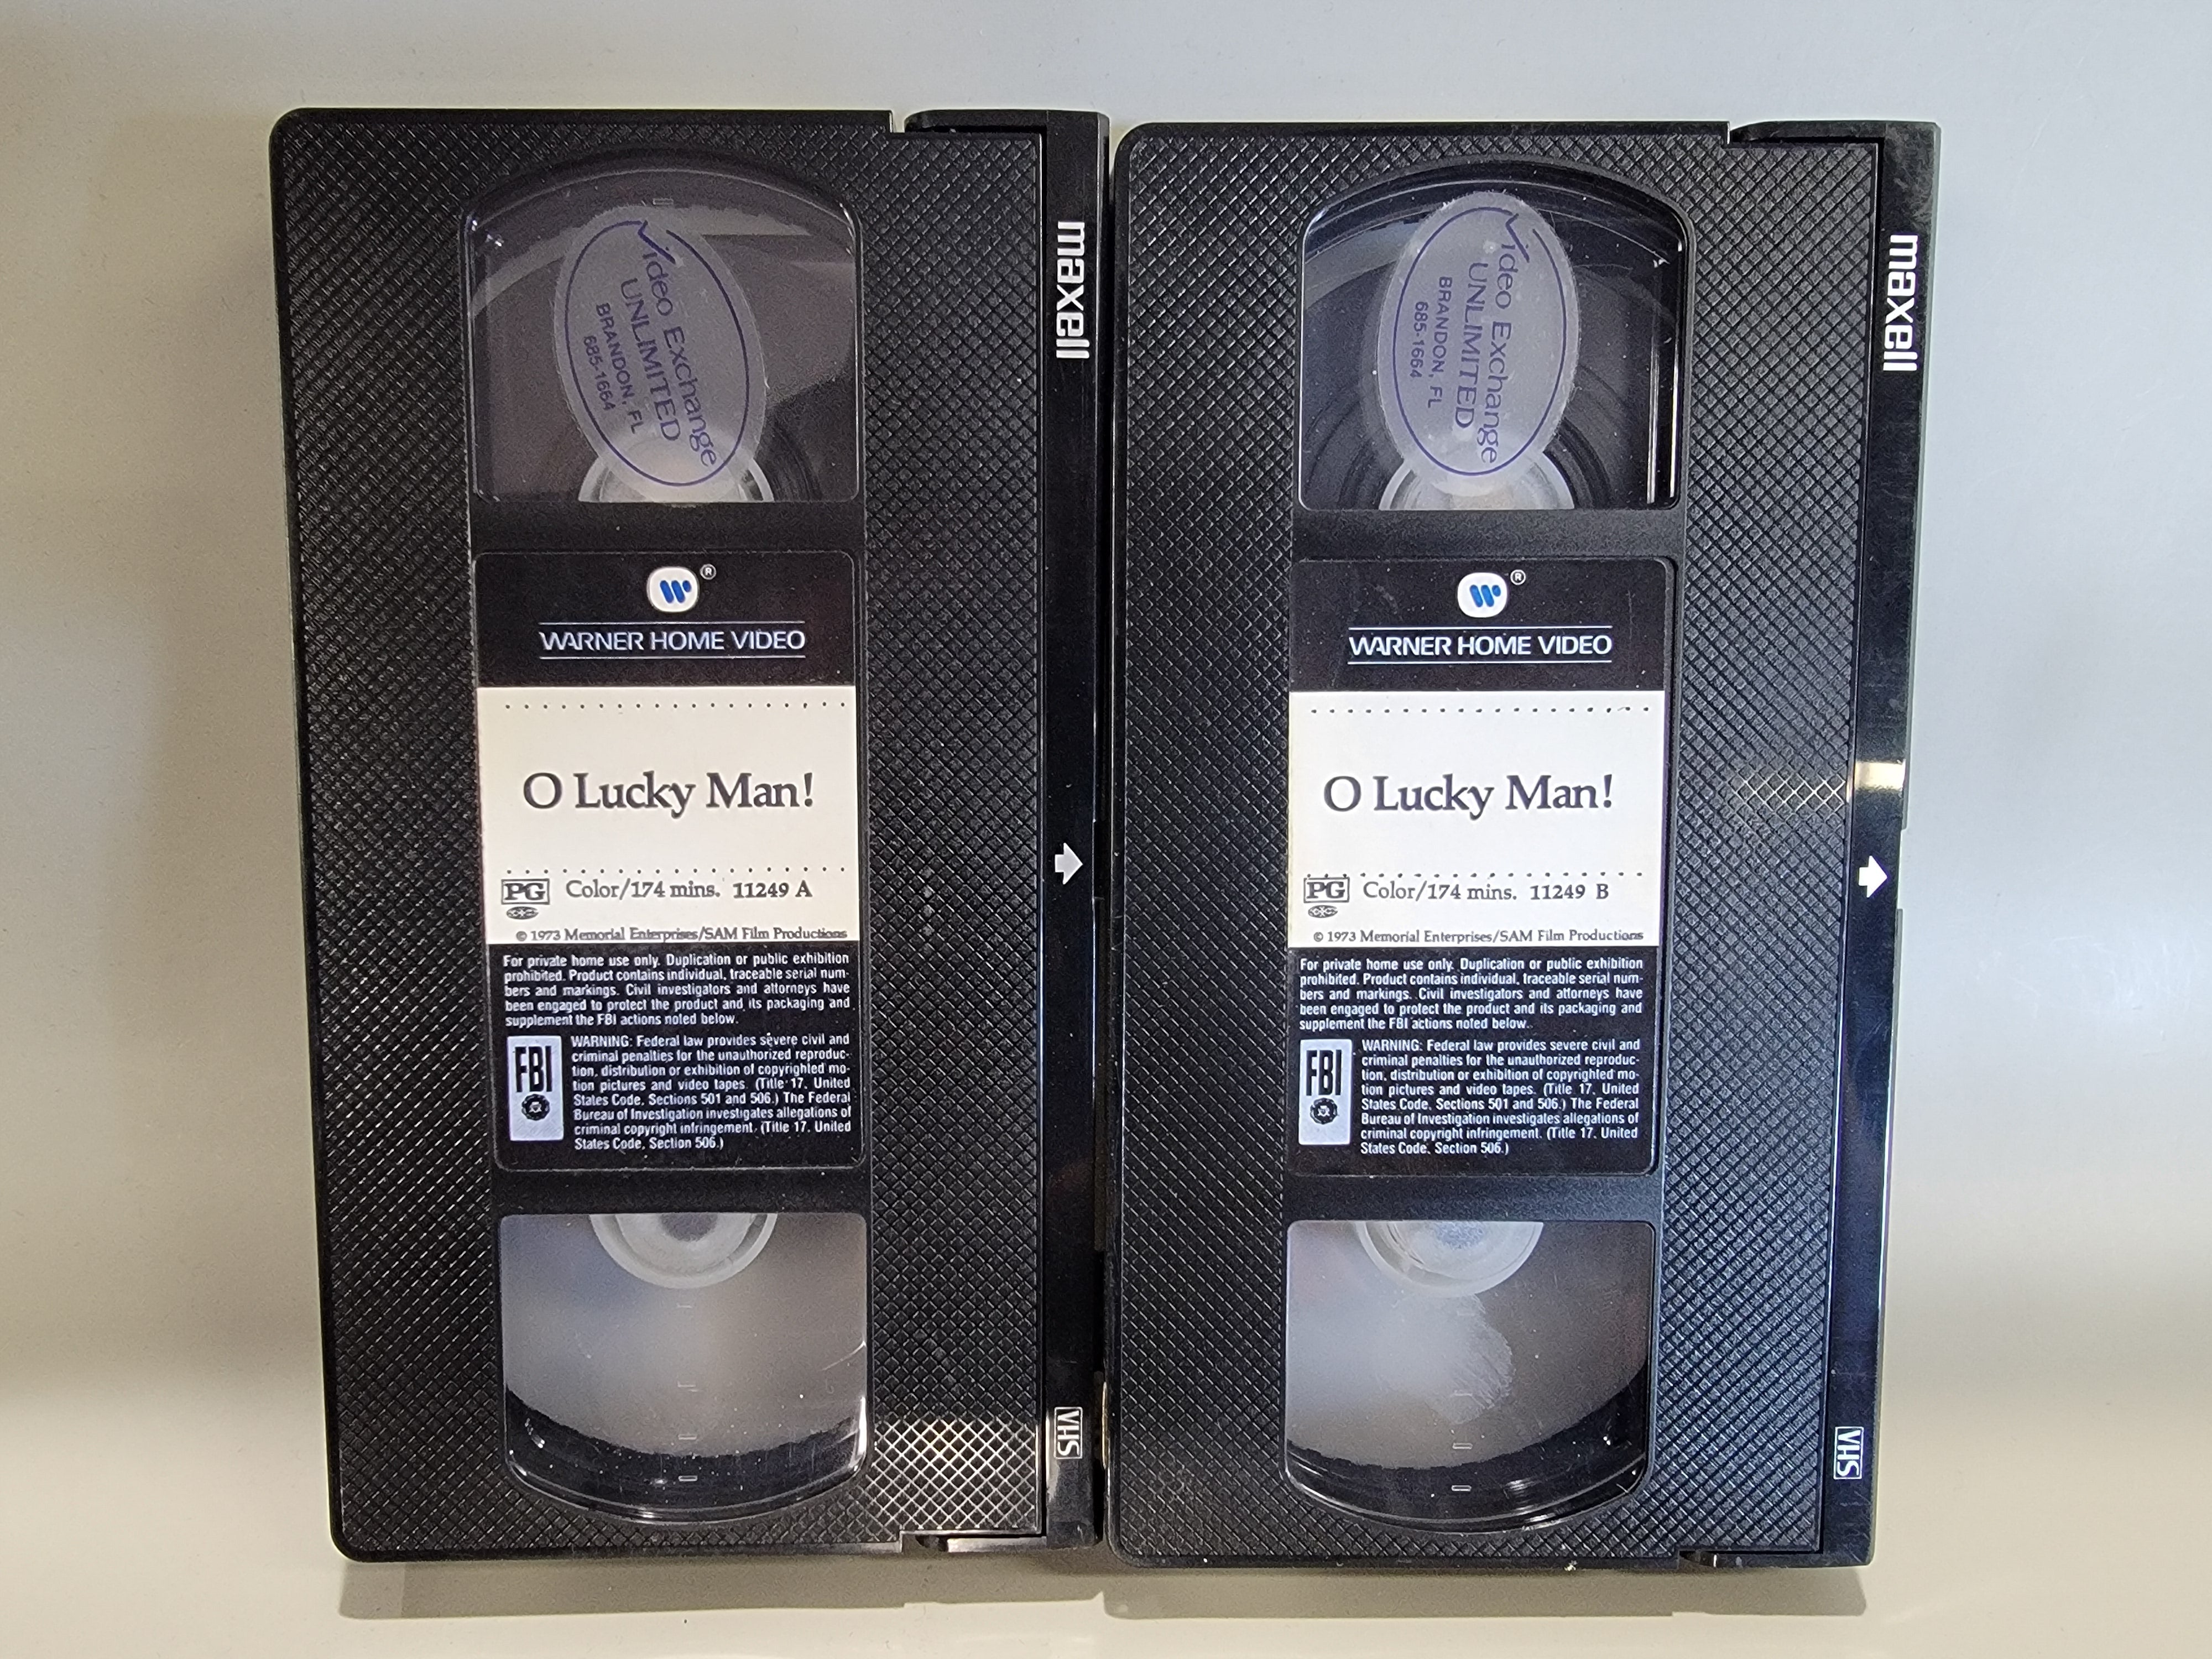 O LUCKY MAN! VHS [USED]